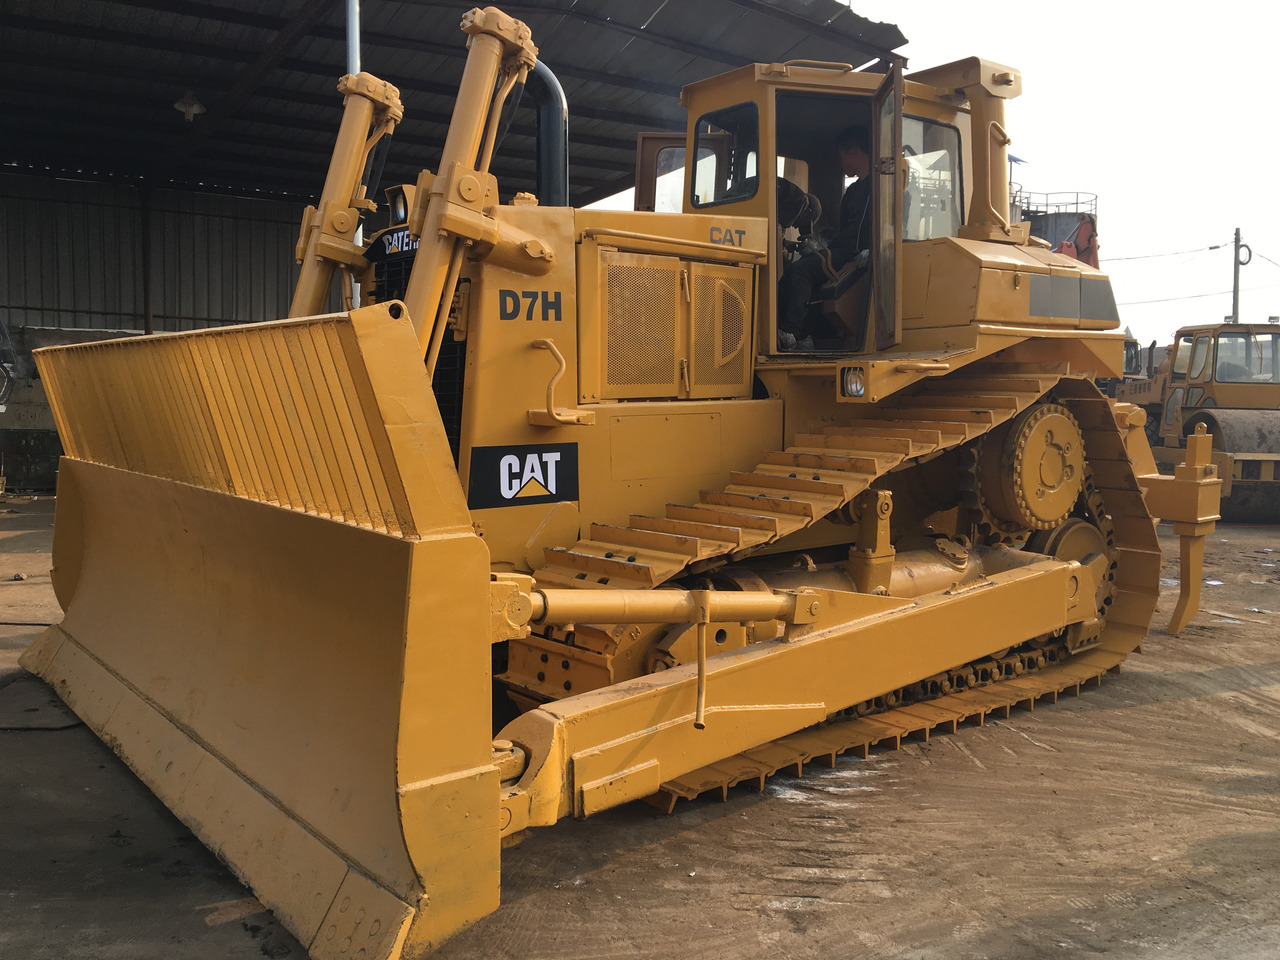 Bulldozer neuf Famous brand CATERPILLAR D7H in good condition on sale: photos 3